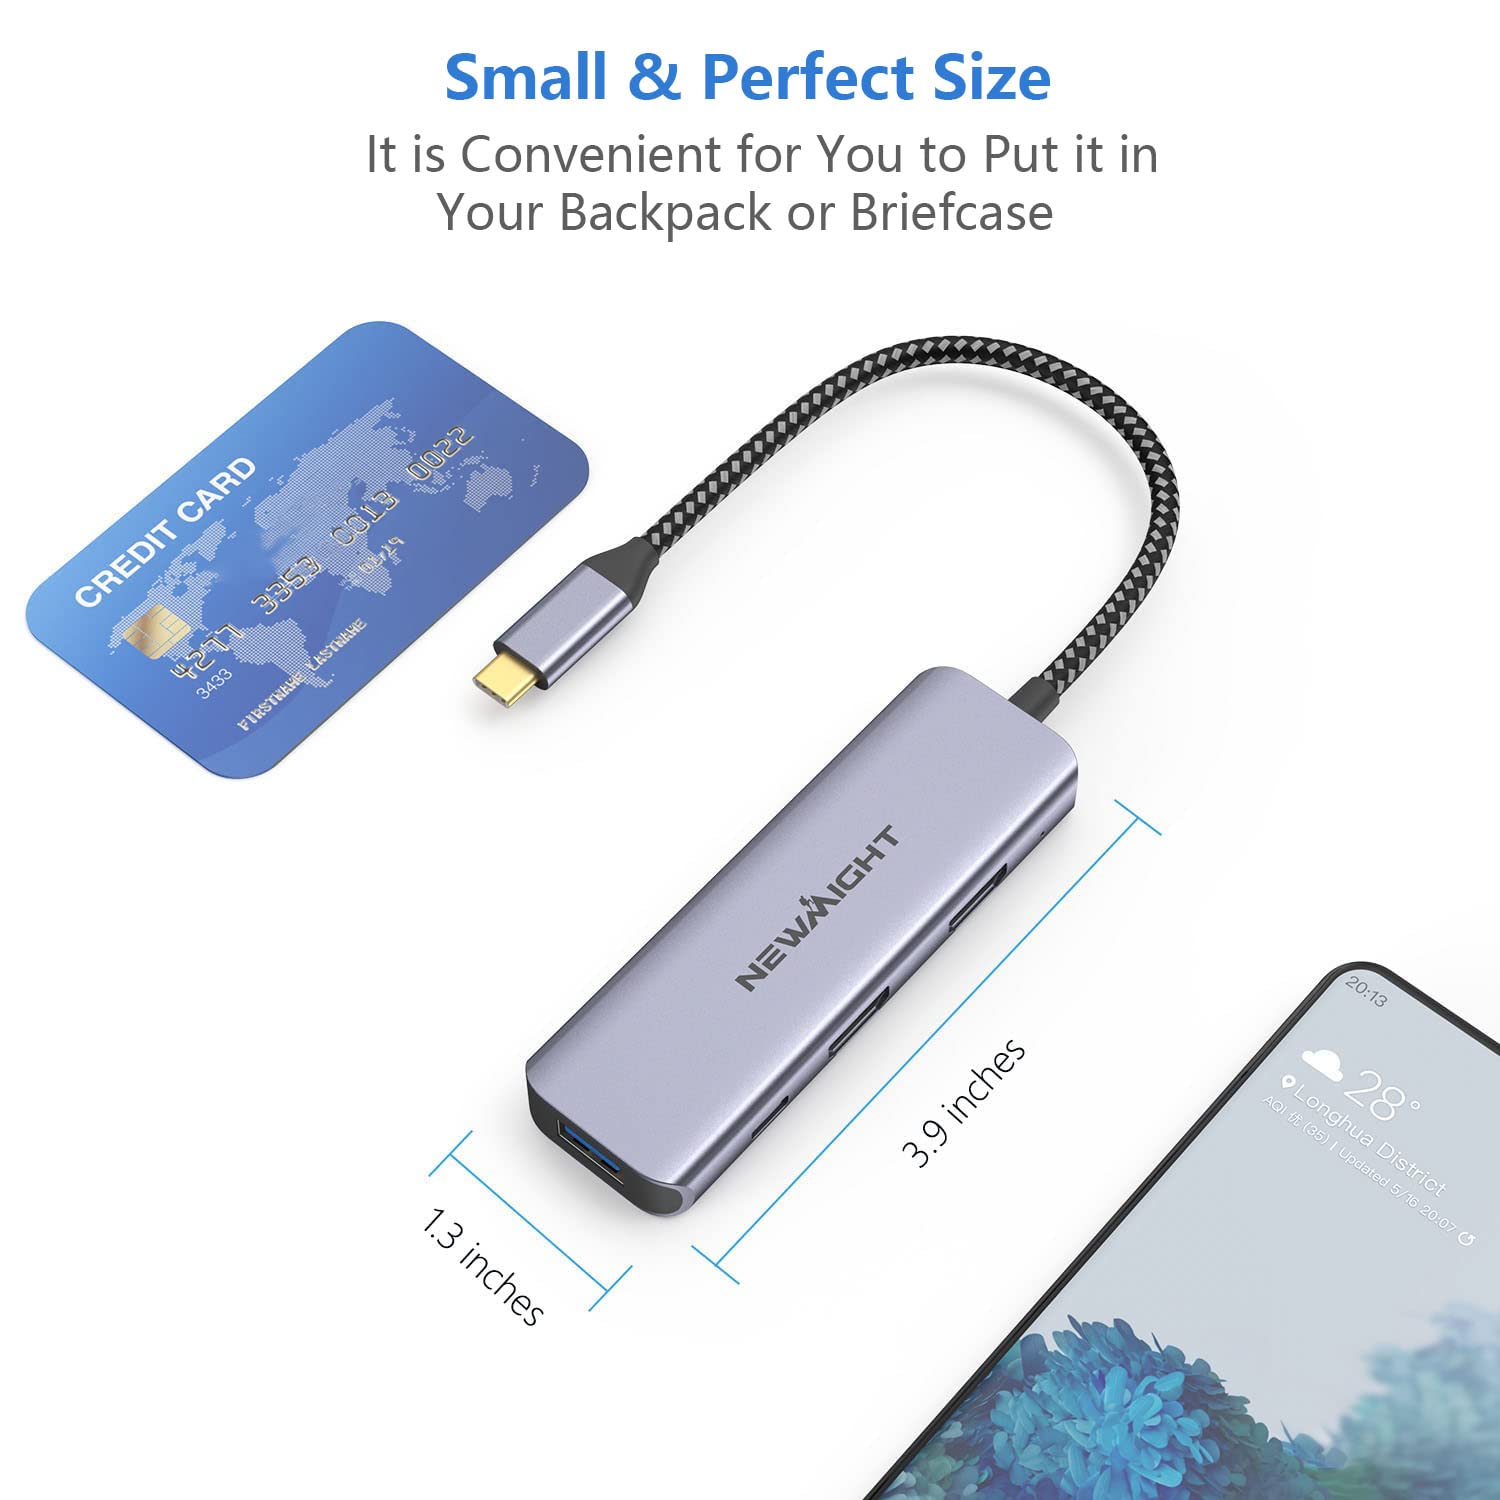 HDMI Adapter for Dual Monitors, Newmight 4 in 1 USB C to Dual HDMI Adapter with 100W Power Delivery, USB Data Transfer, HDMI to USB C Adapter with 2 HDMI 4K for MacBook, Dell and Other Type C Devices